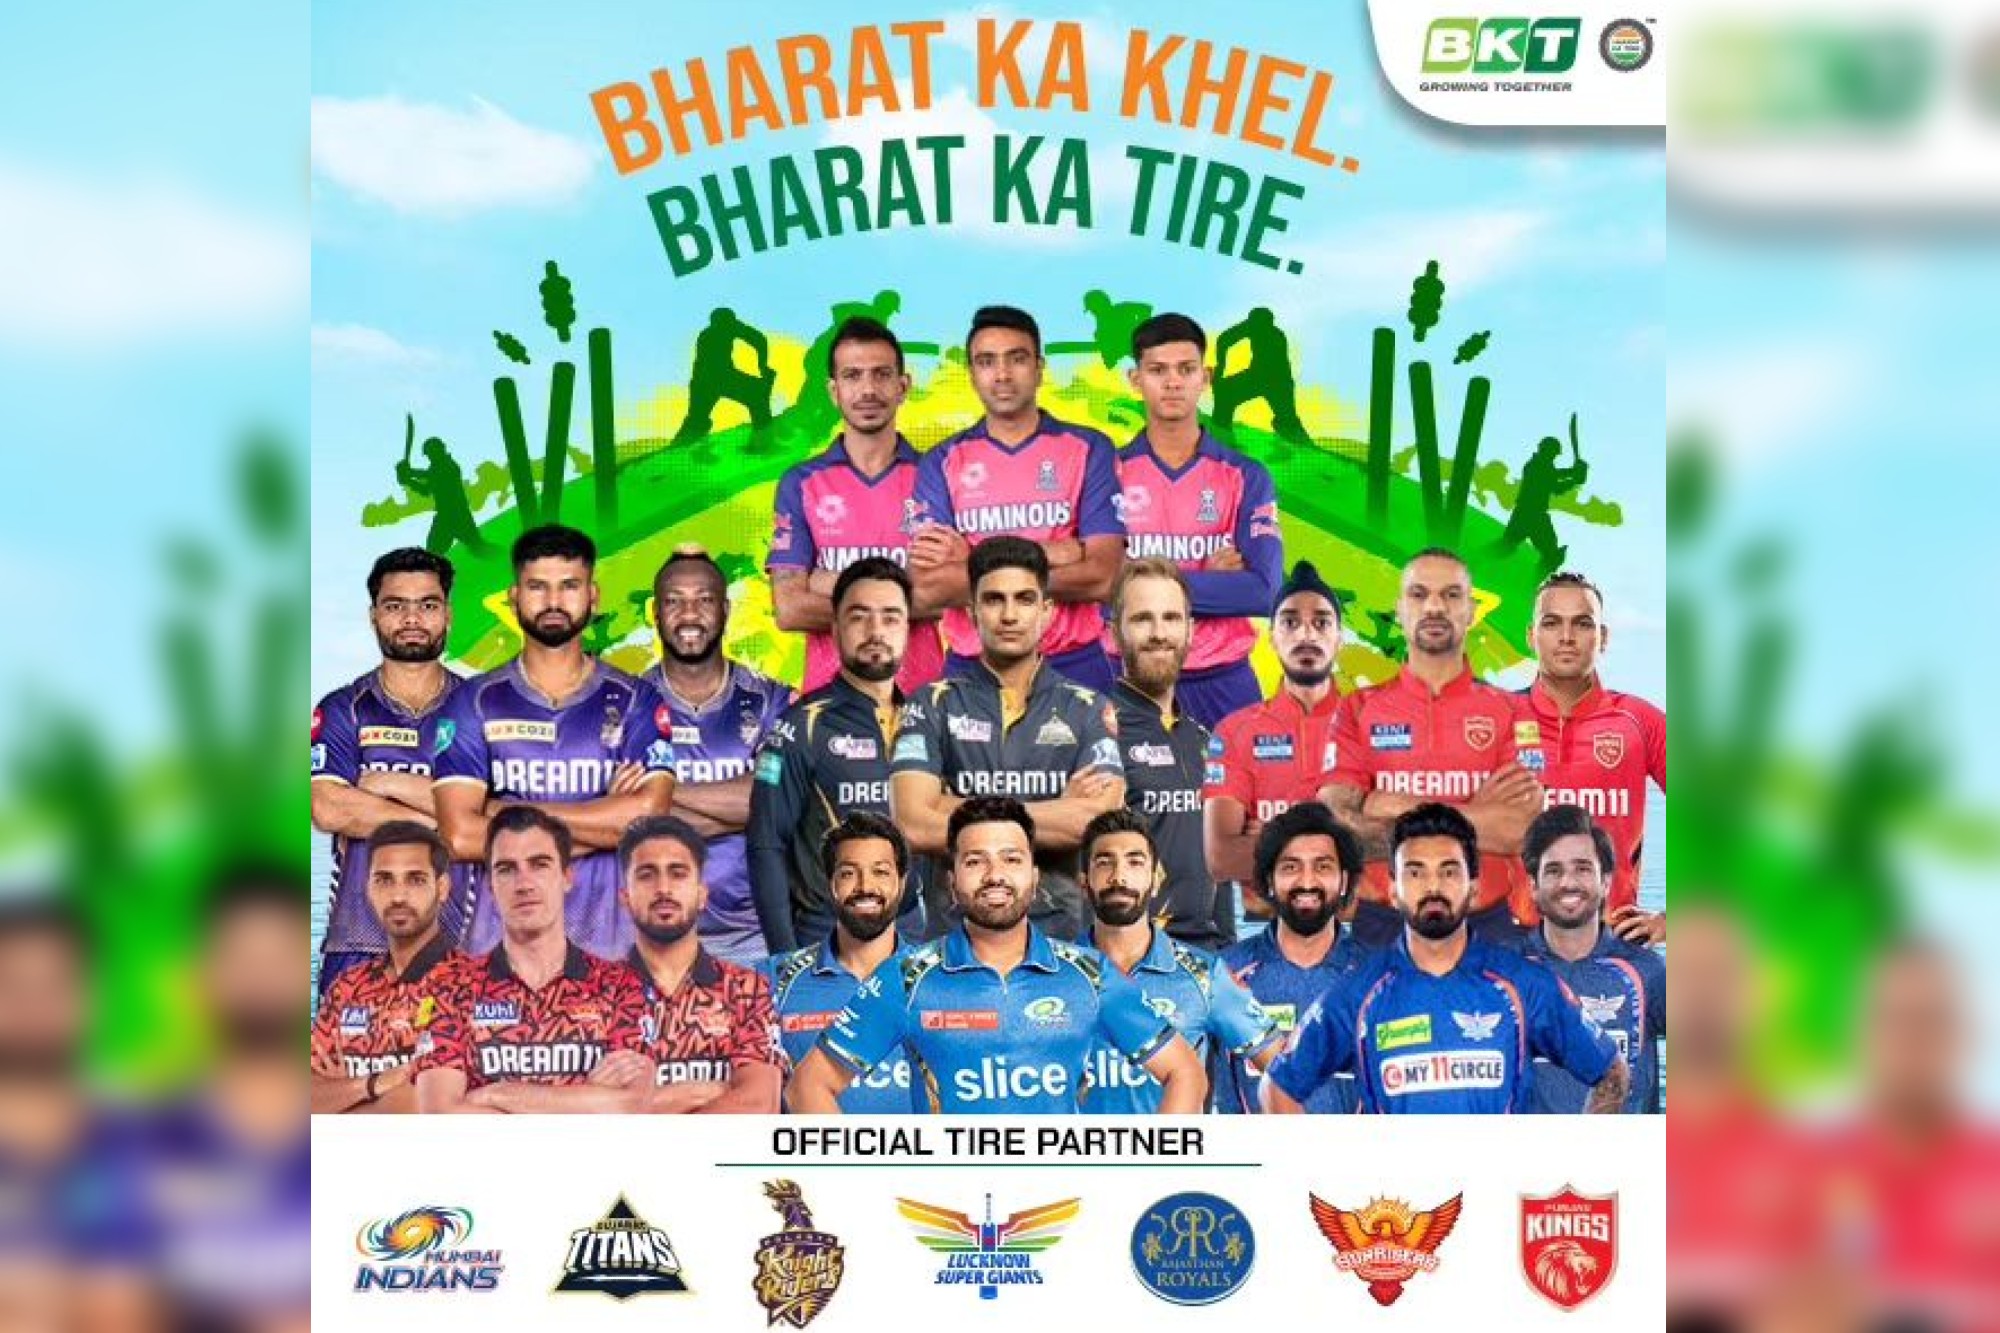 BKT Tires, an Indian multinational company and a global player in the Off-Highway tire market is pleased to announce its alignment with seven prestigious T20 cricket teams for the upcoming season of the highly anticipated T20 Cricket league.